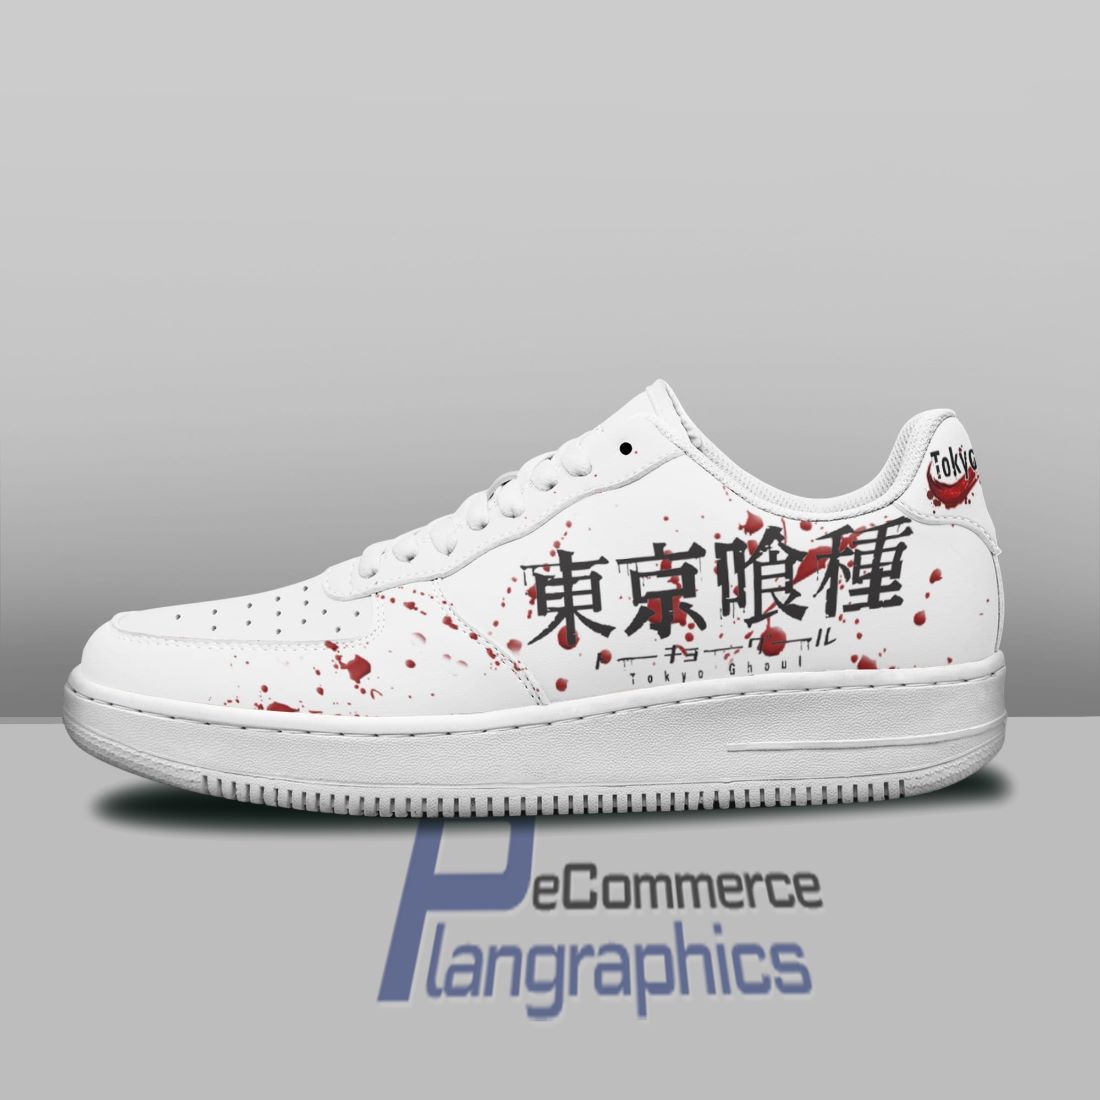 tokyo ghoul air forces